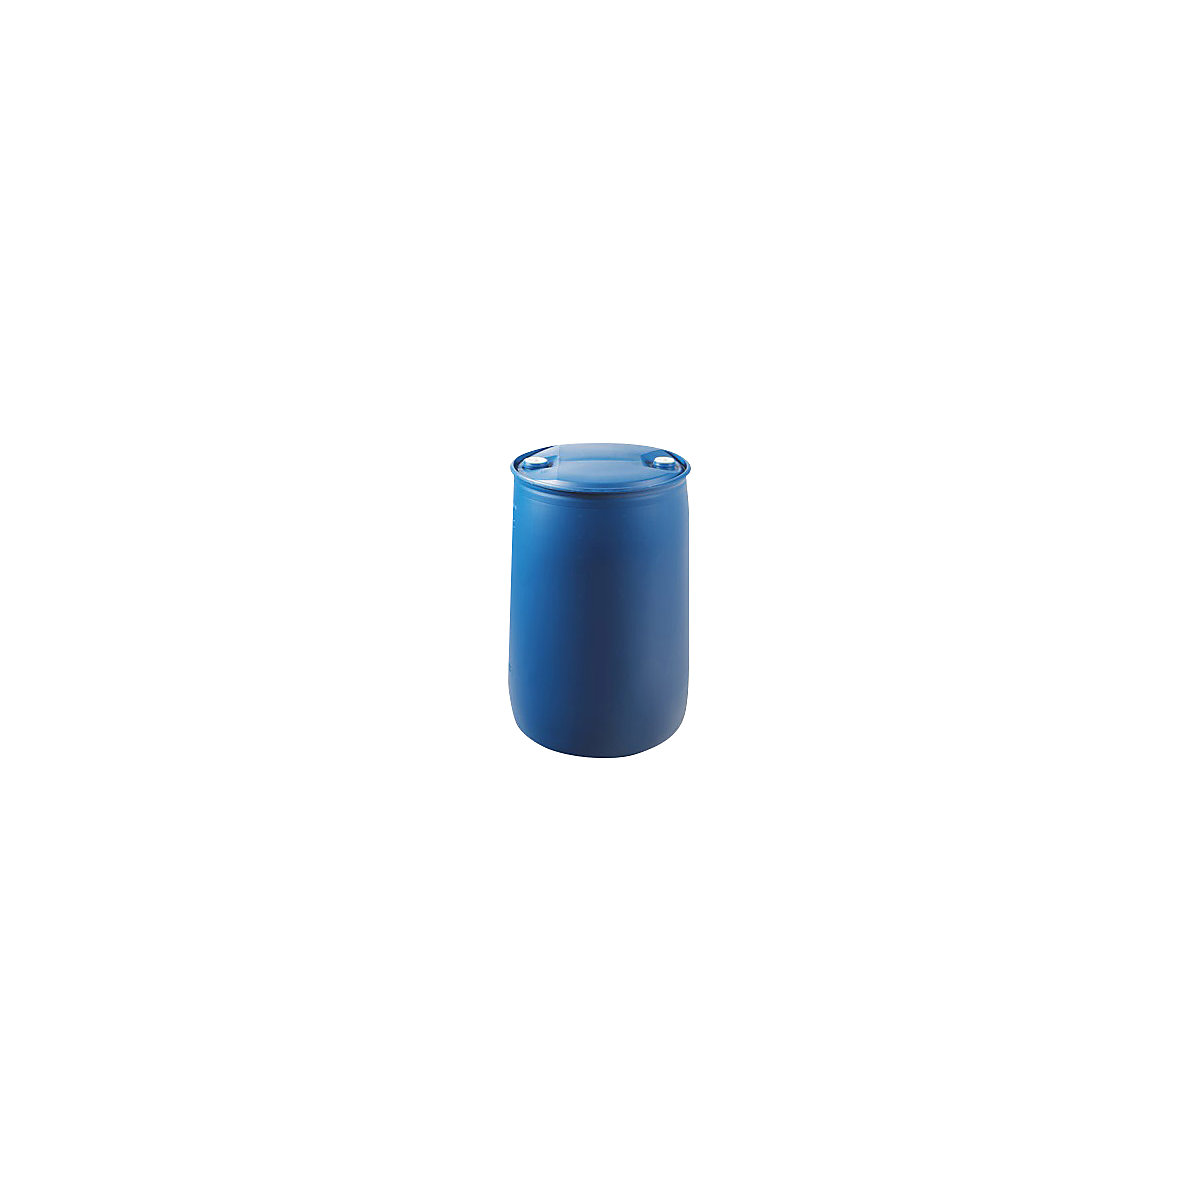 Bung drum (L-ring drum), blue, capacity 220 l, height 935 mm